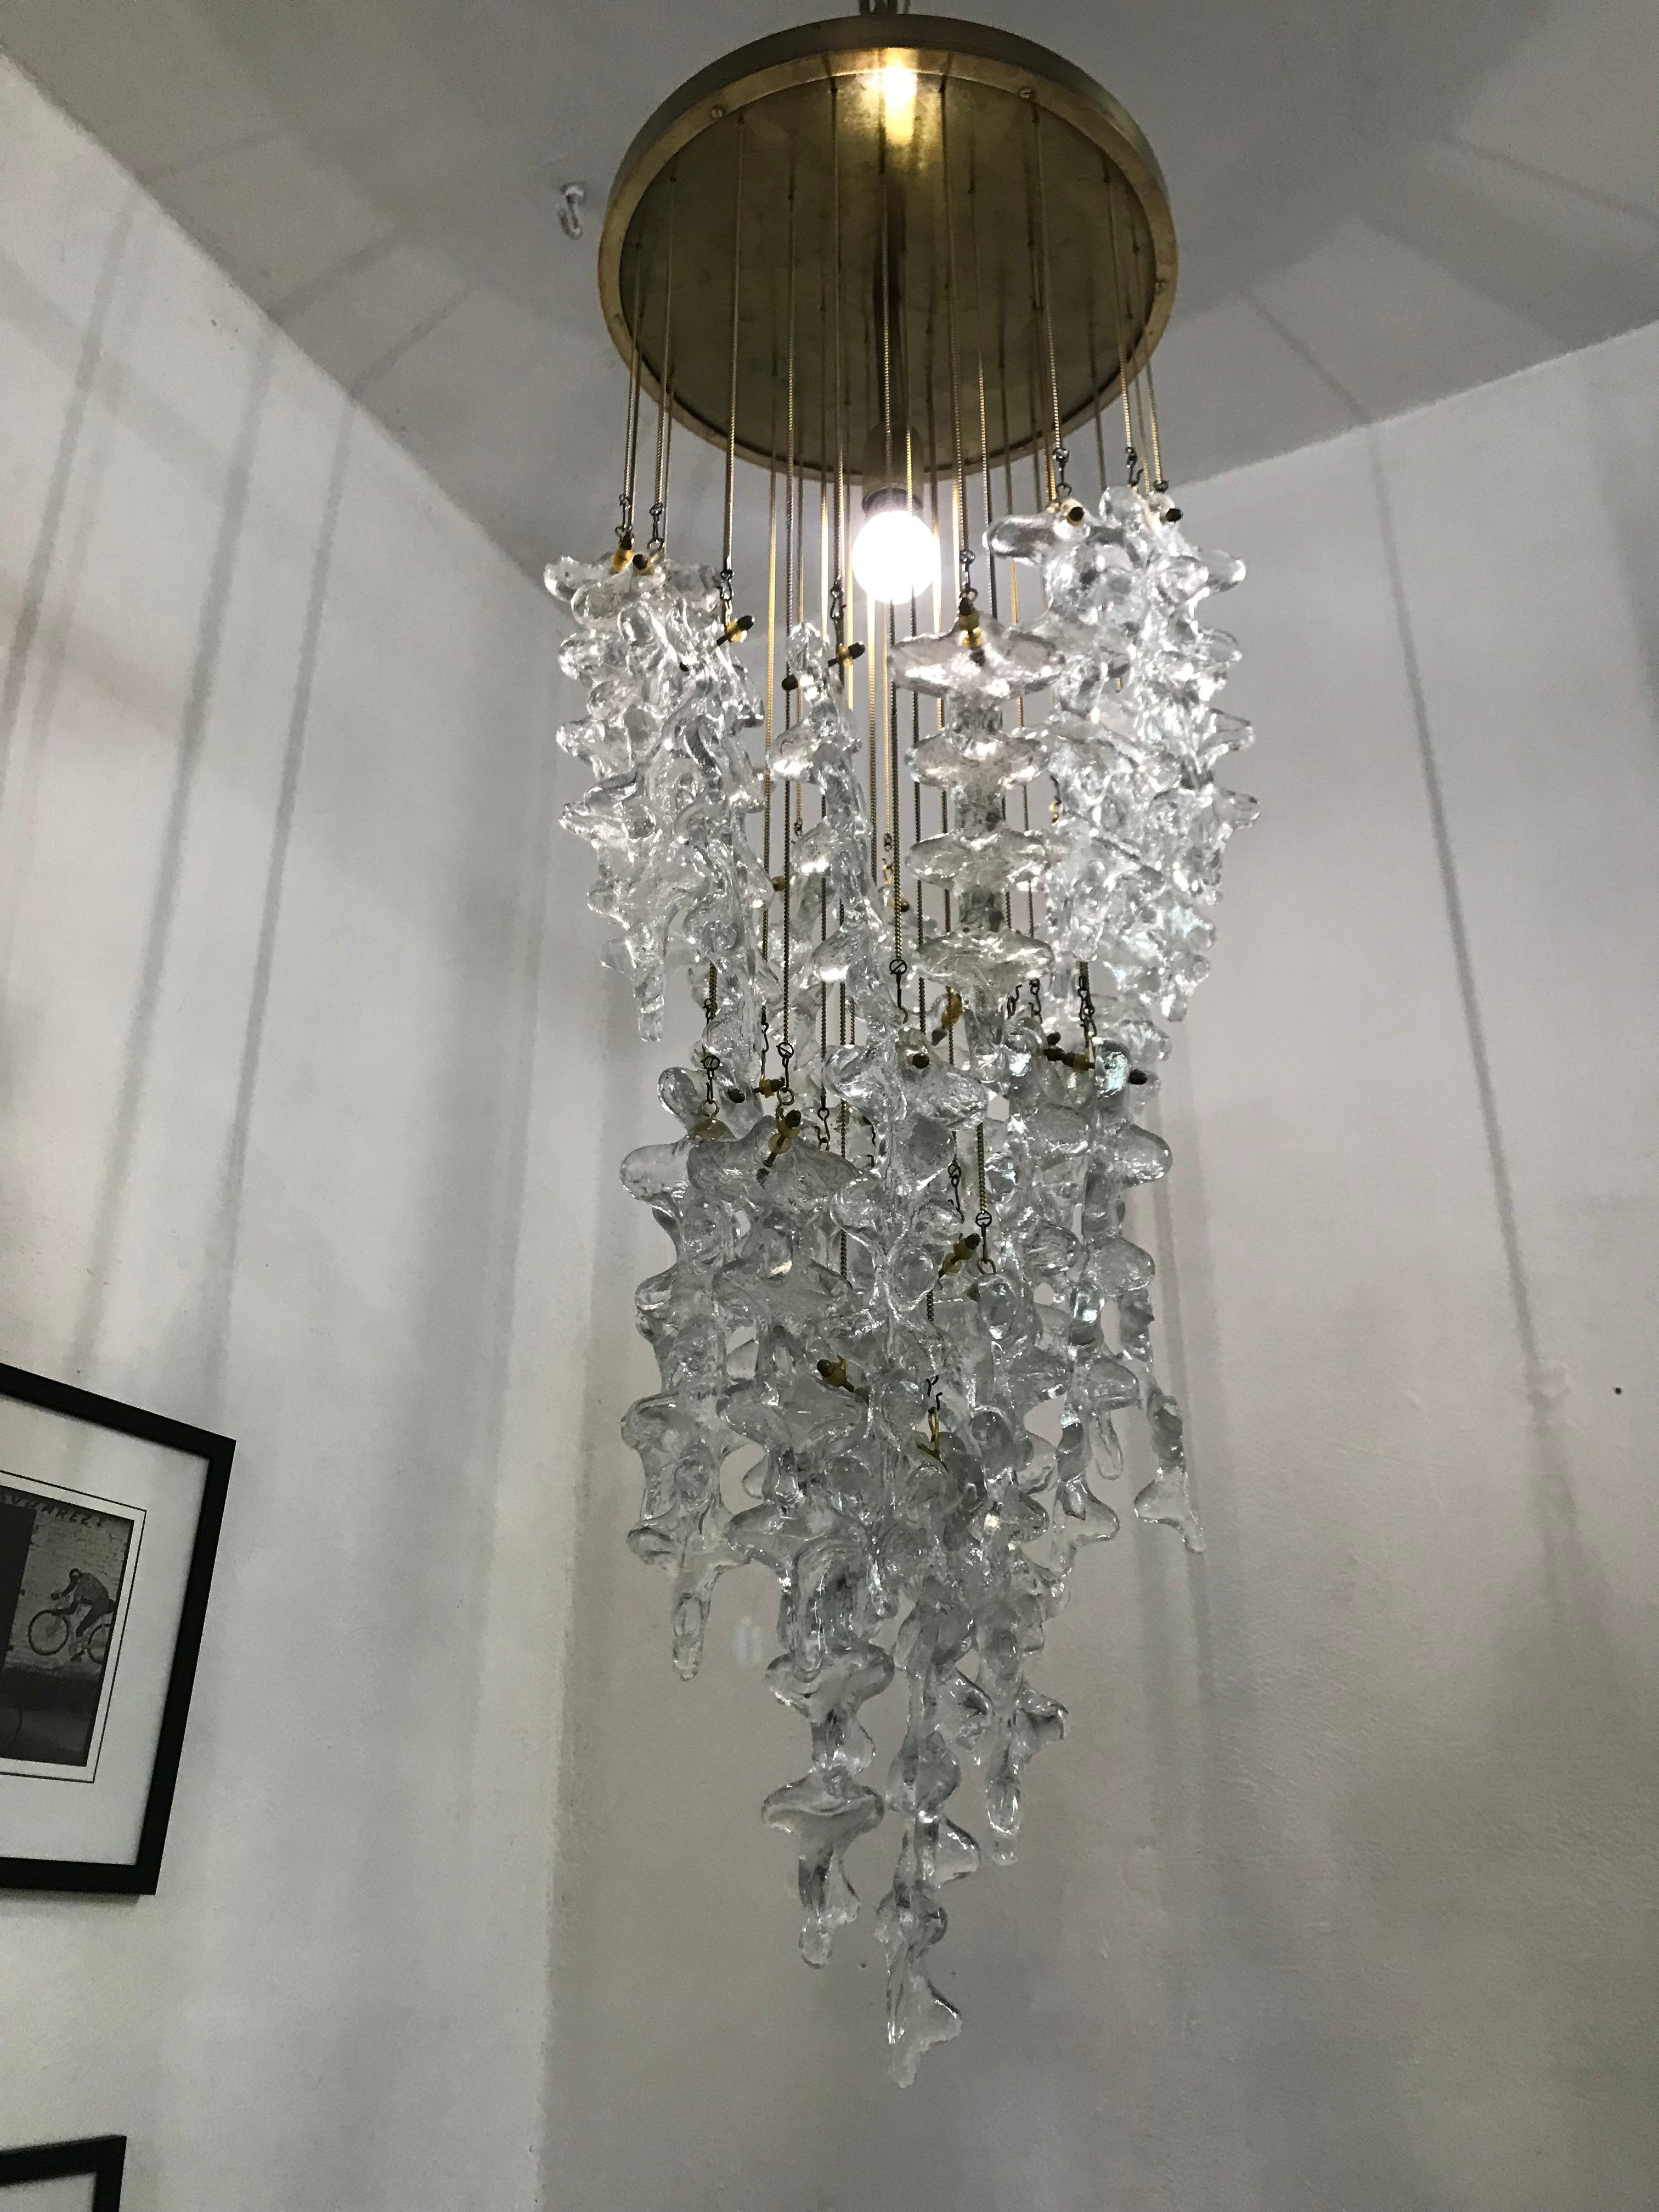 Large multi-tiered chandelier in hand blown Murano glass by Venini , Italy, circa 1970.
Comprised of several pieces of glass resembling icicles, hanging from brass chains in 3 concentric circles.
The length of the chains can be adjusted as wished